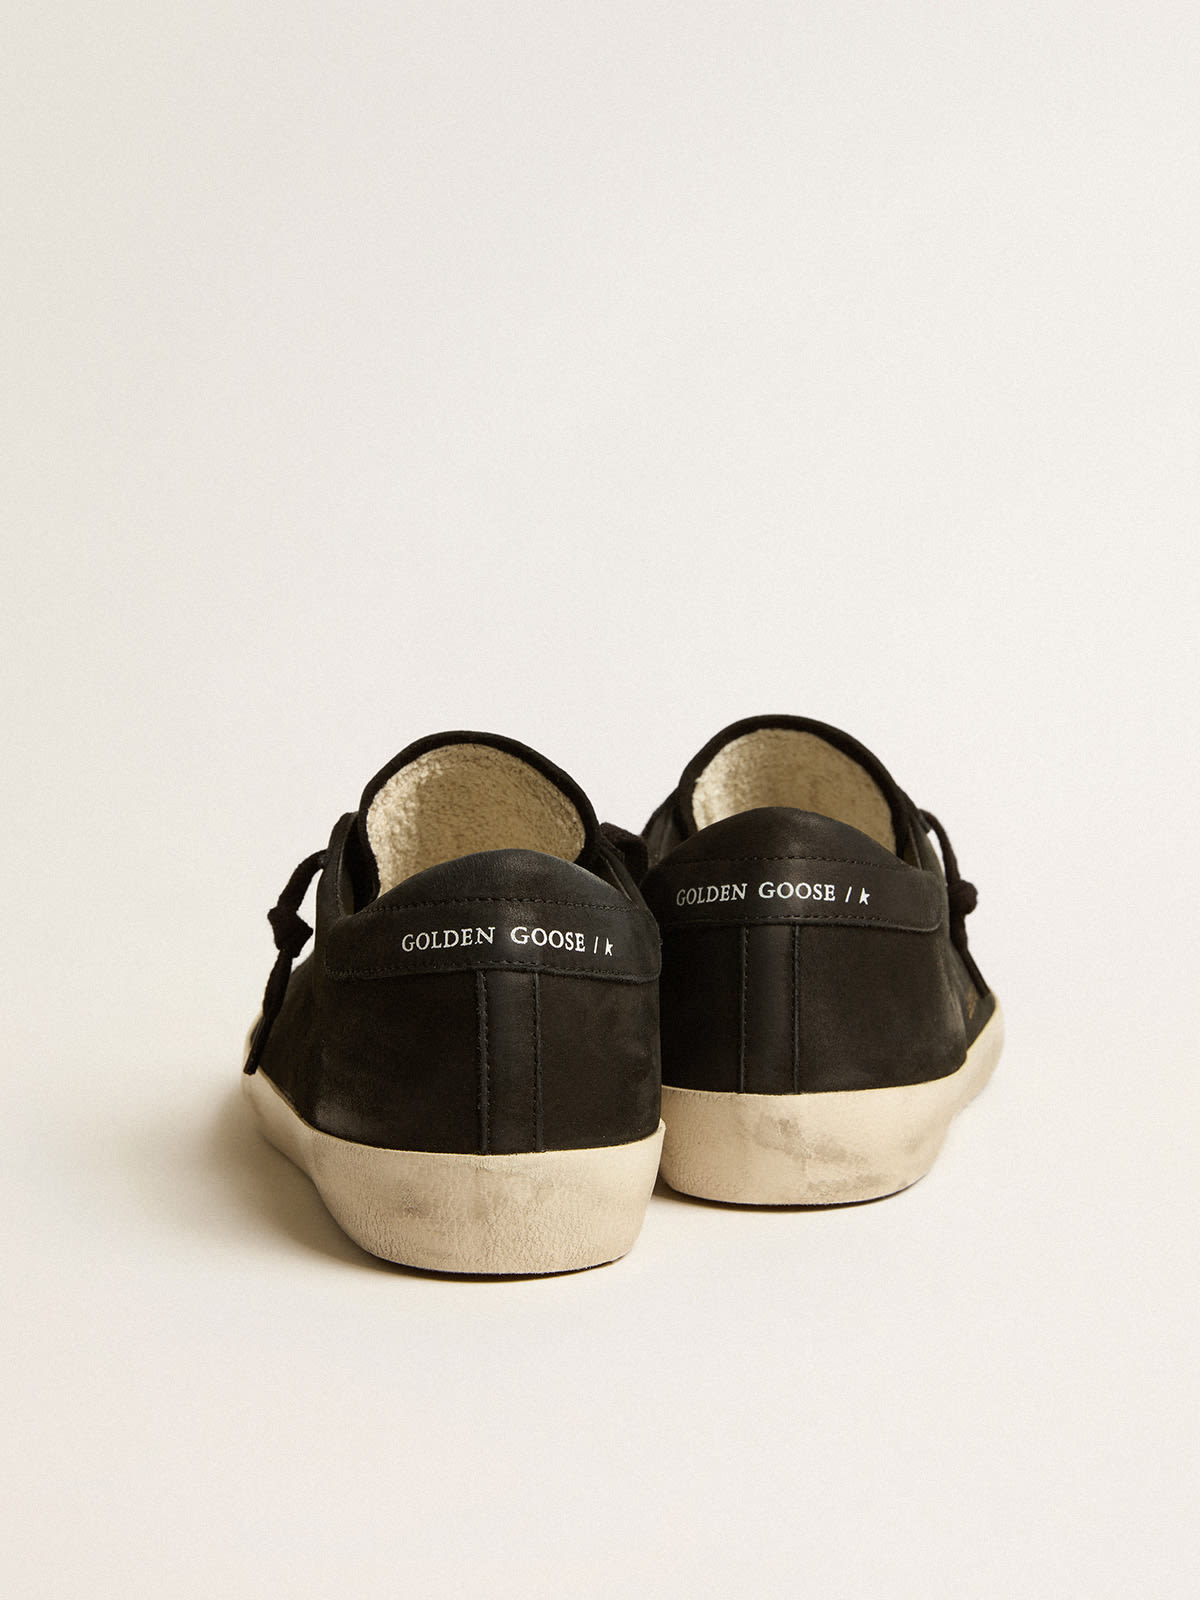 Golden Goose - Super-Star in black nubuck with perforated star and black nubuck heel tab in 